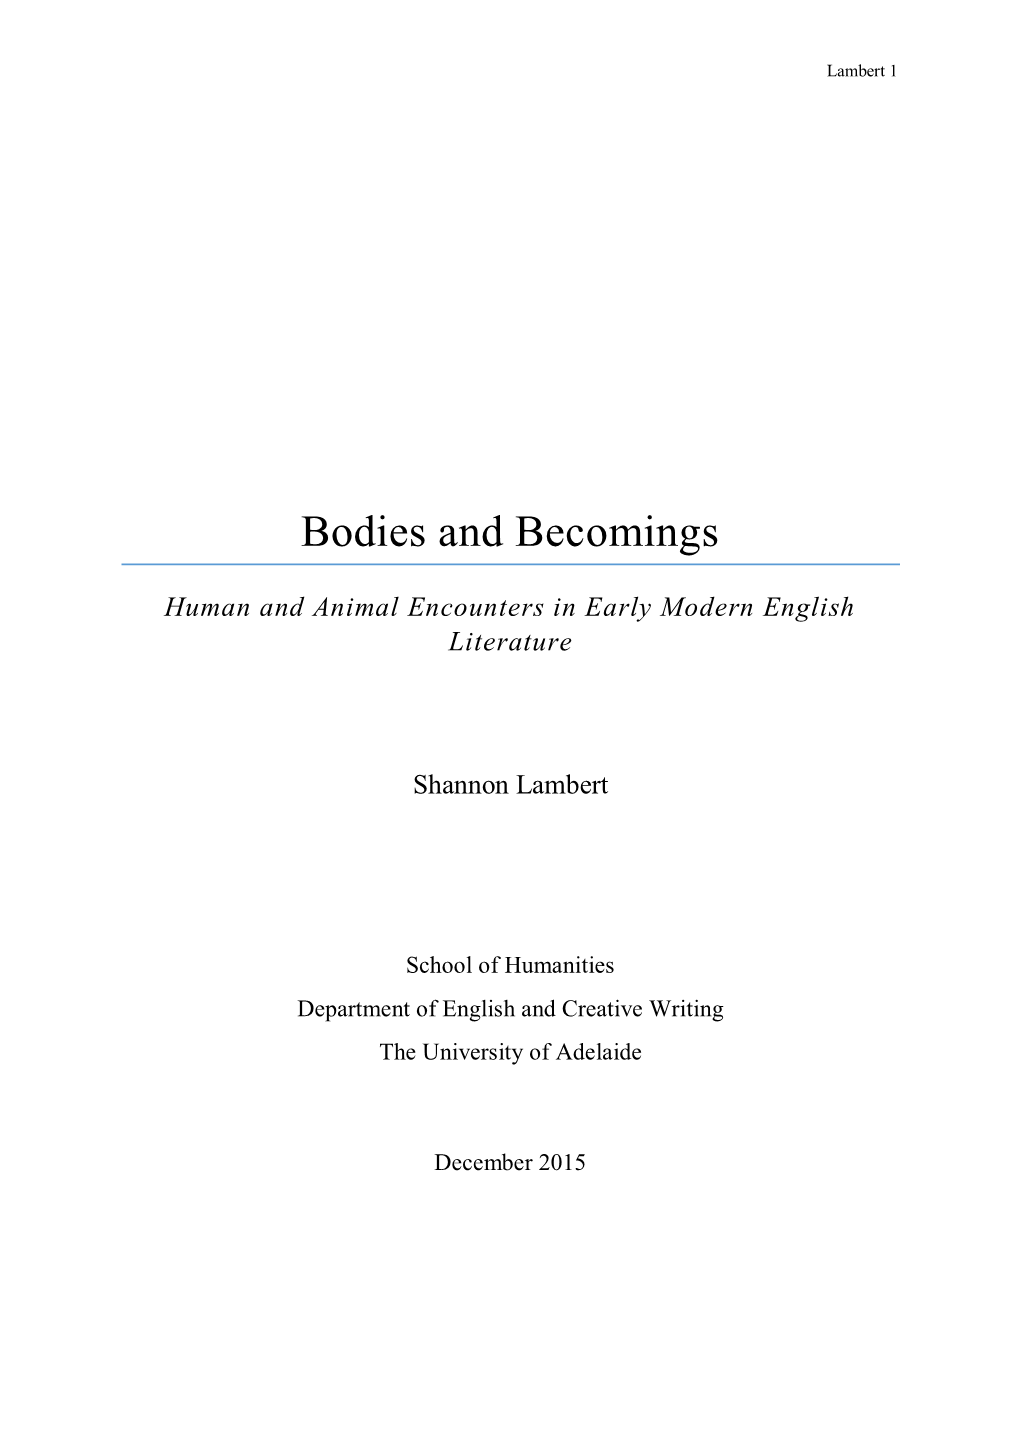 Bodies and Becomings: Human and Animal Encounters in Early Modern